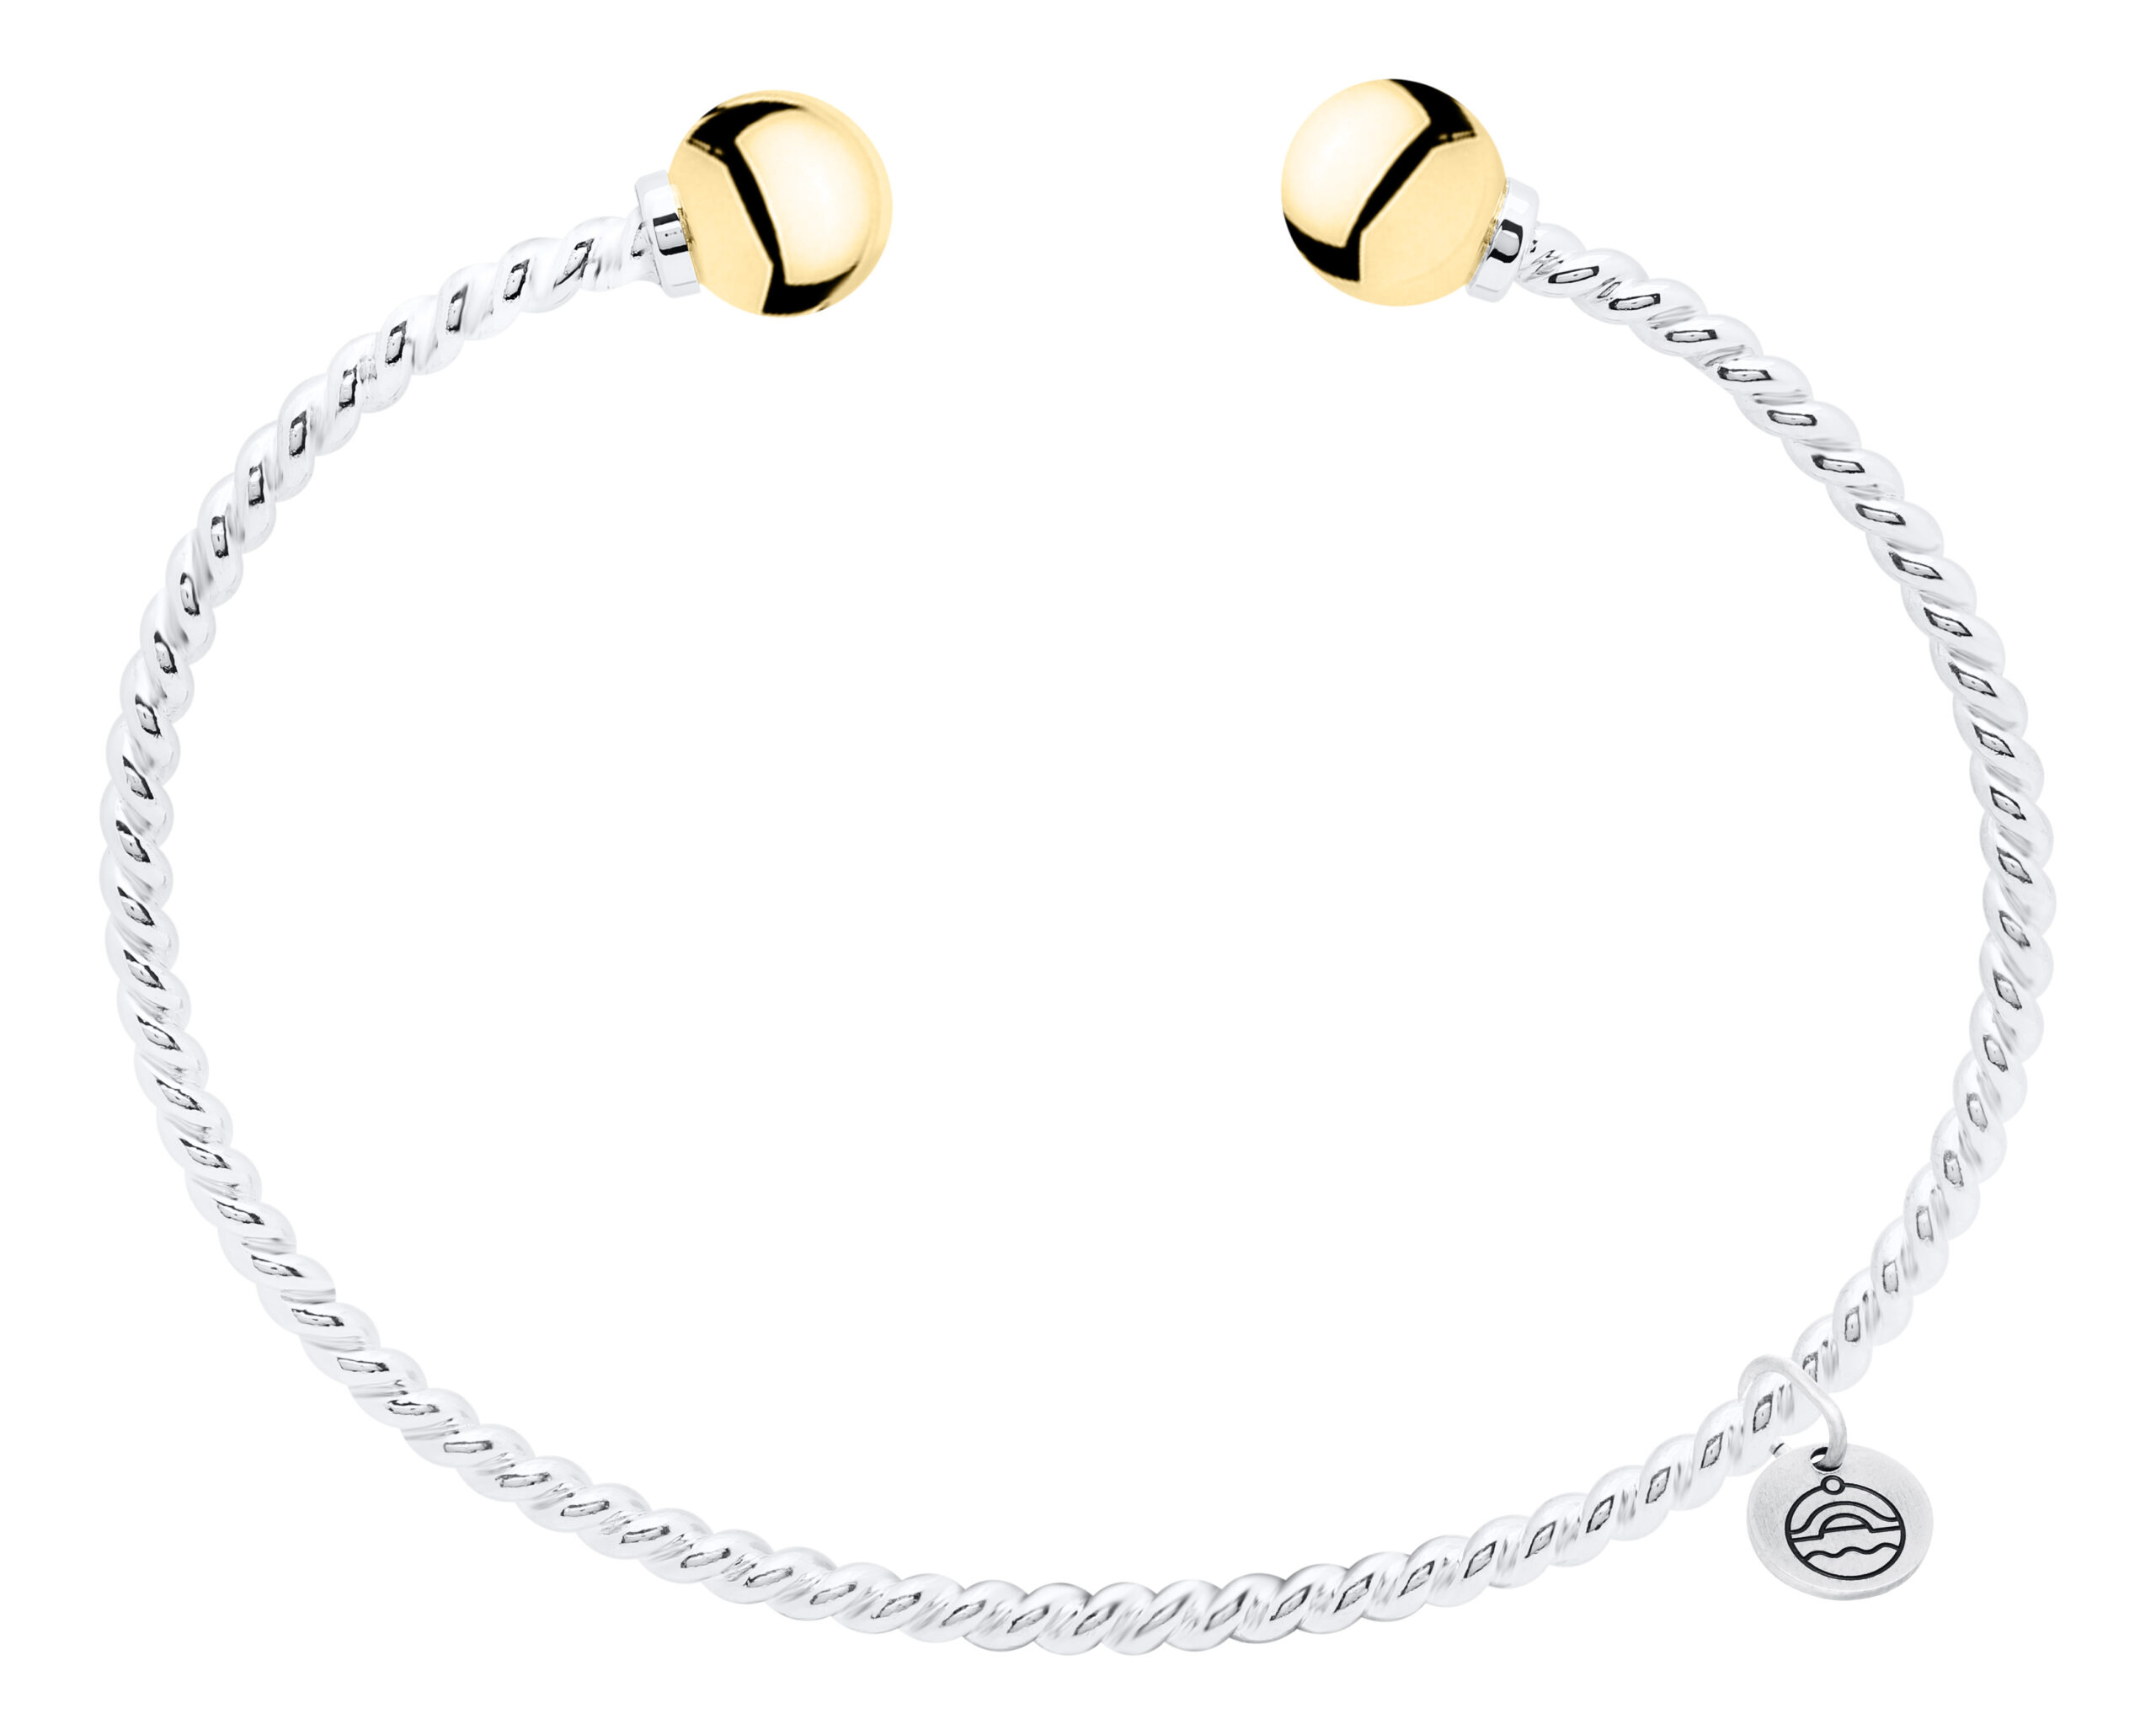 LeStage Cape Cod ss with rose gold swirl ball bracelet – Butterfly Beach  Jewelers